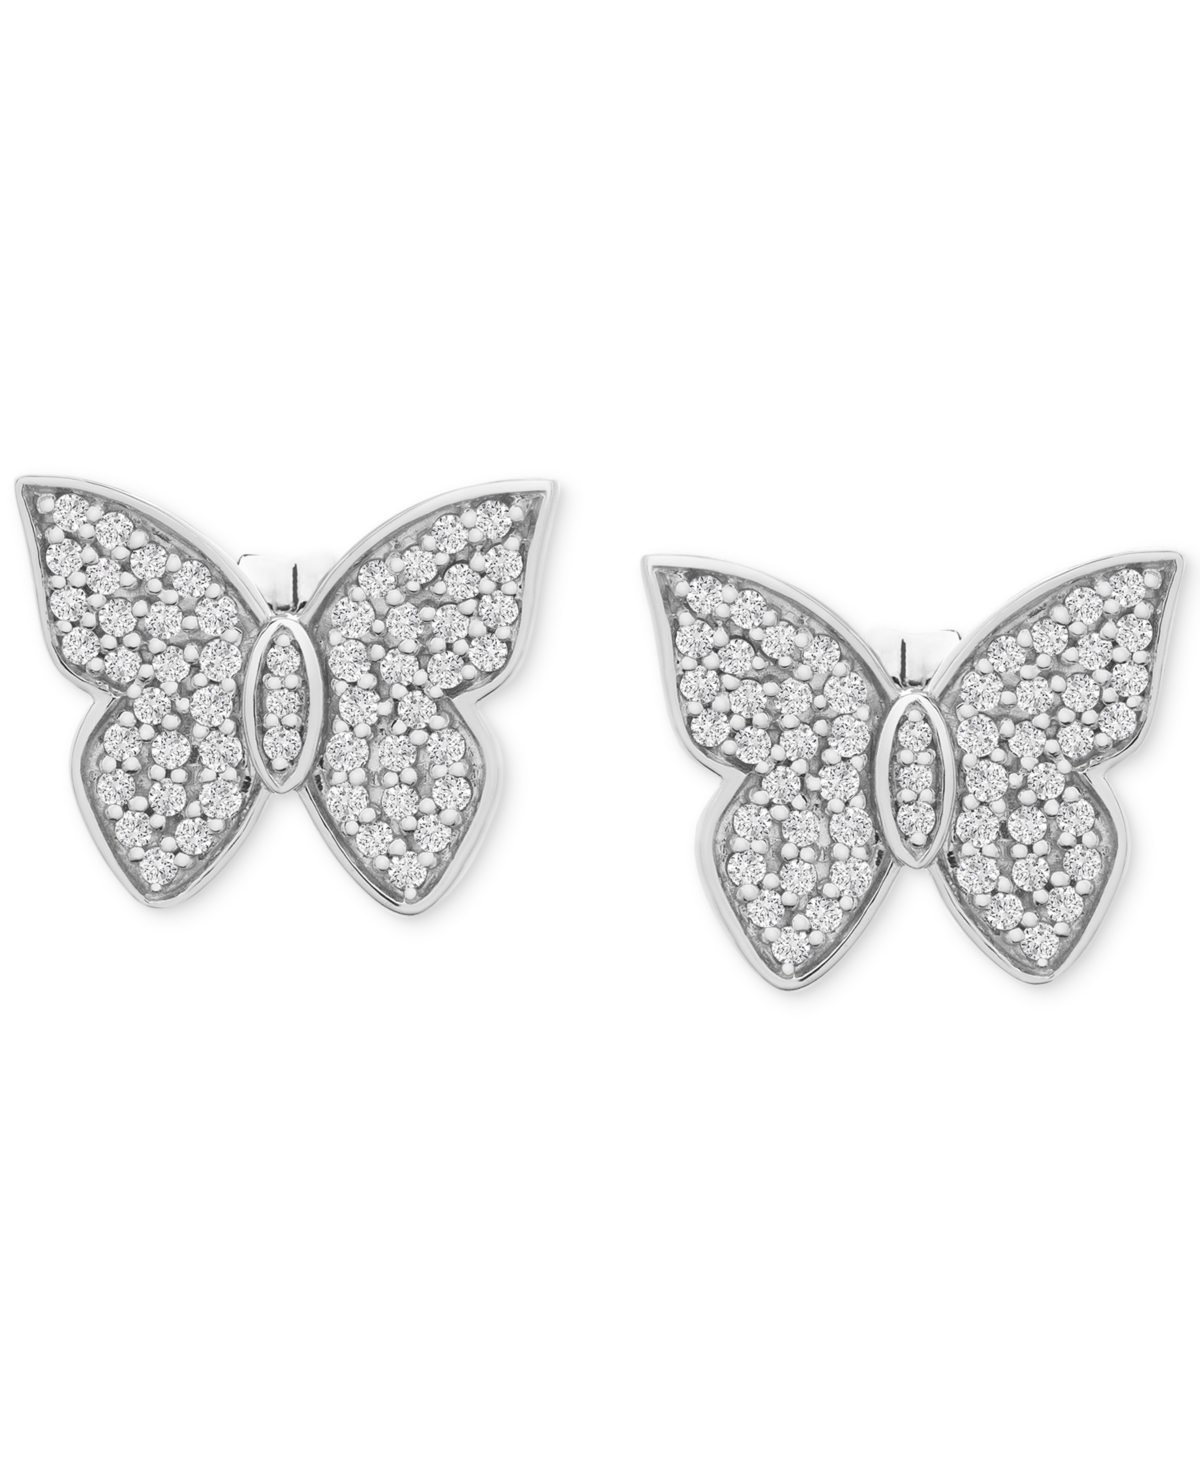 Diamond Butterfly Stud Earrings (1/2 ct. t.w.) in 14k White Gold, Created for Macy's - White Gold